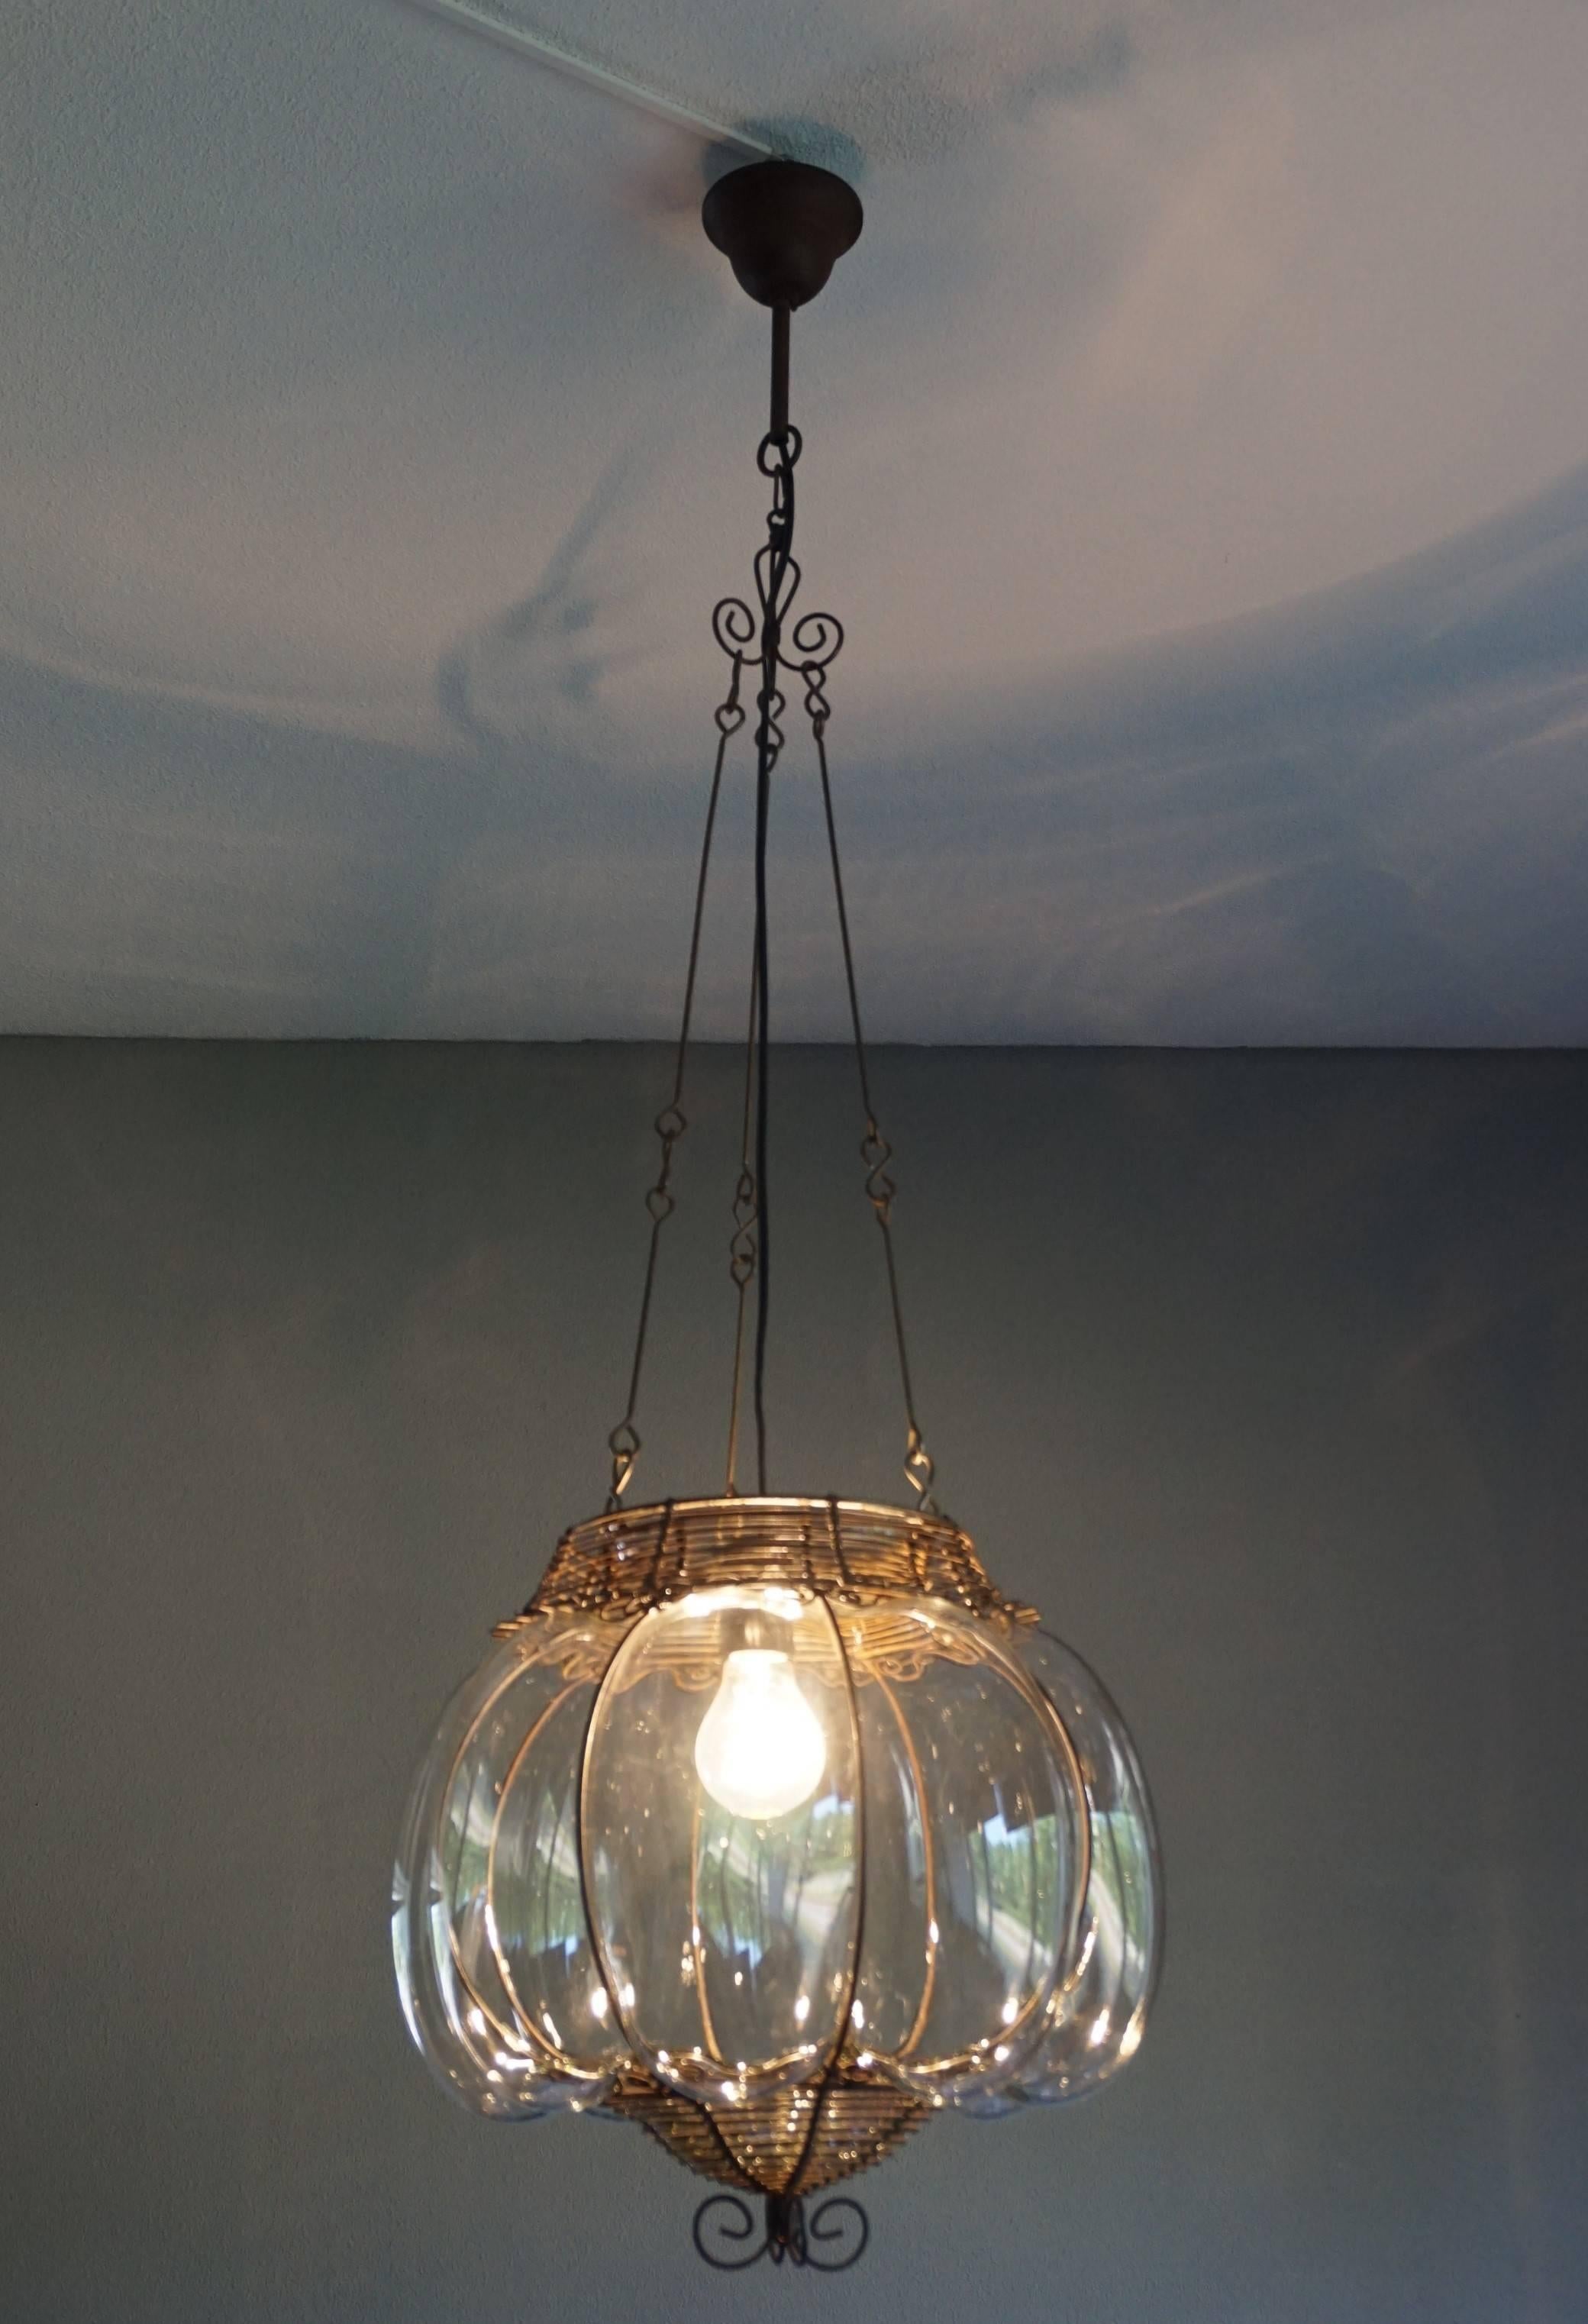 Hand-Crafted Venetian Mouthblown Glass into a Hand-crafted Iron Frame Pendant Light Fixture For Sale